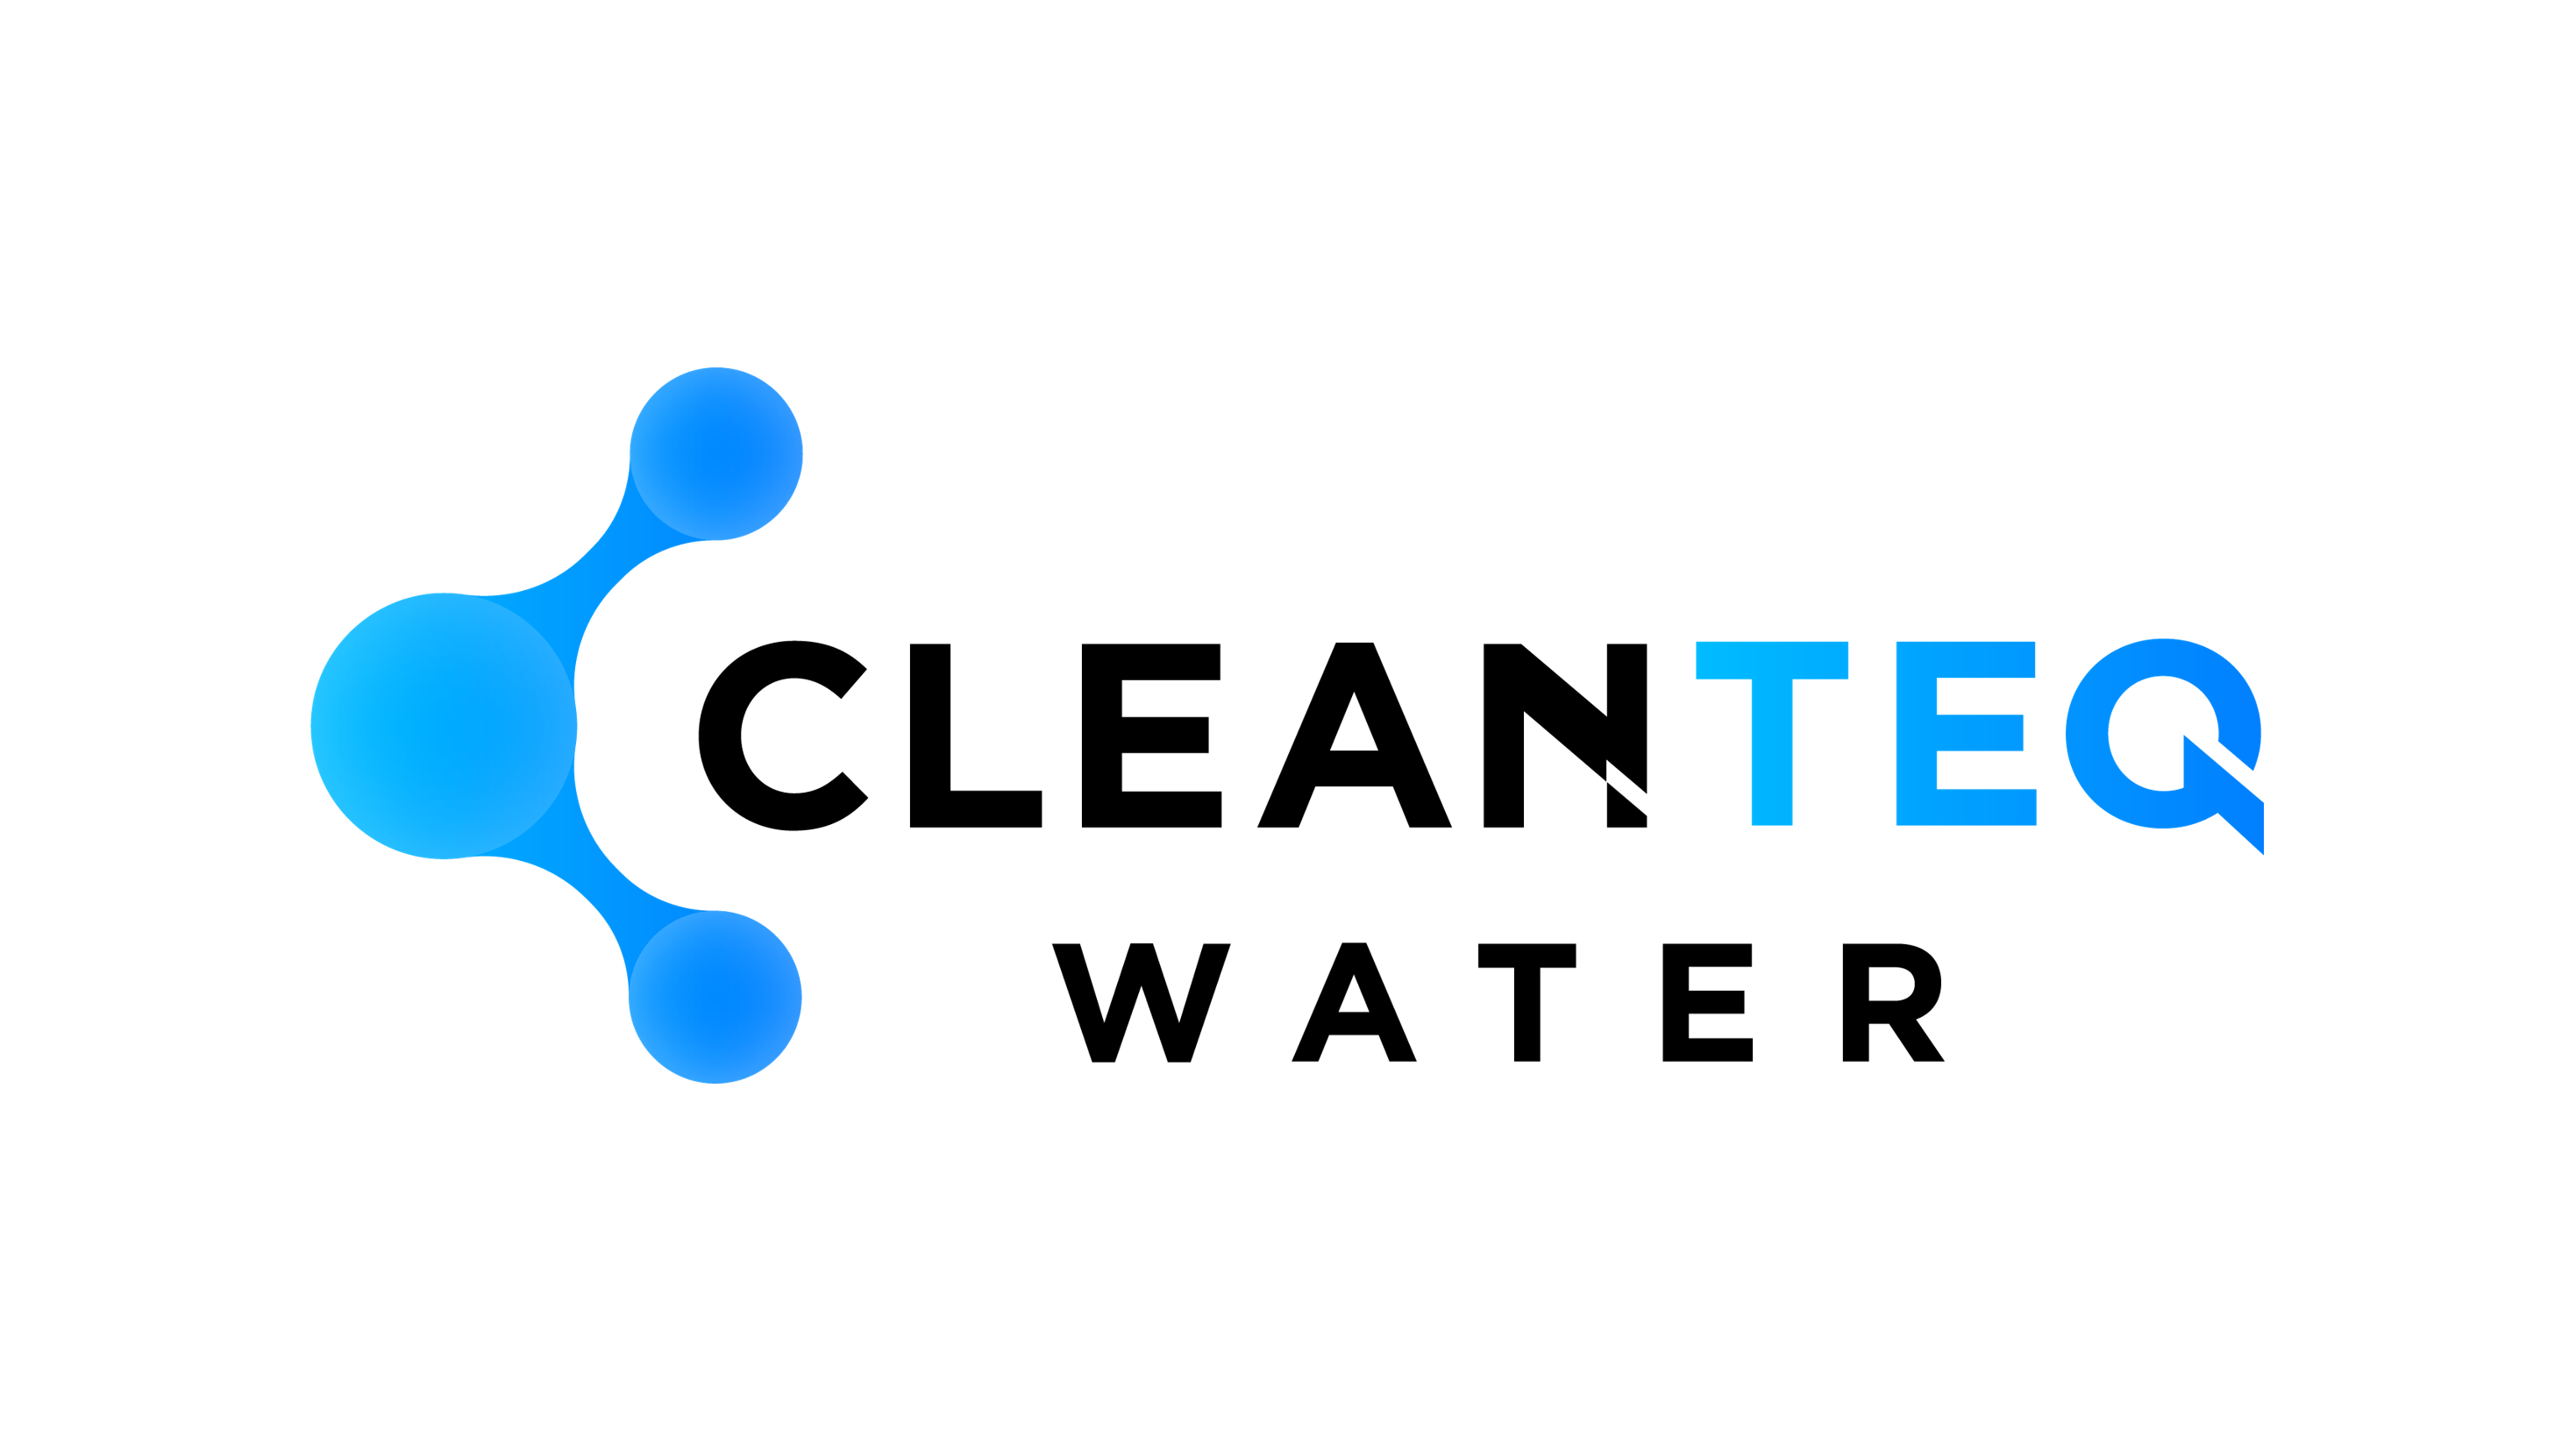 Introduction to Clean TeQ Water